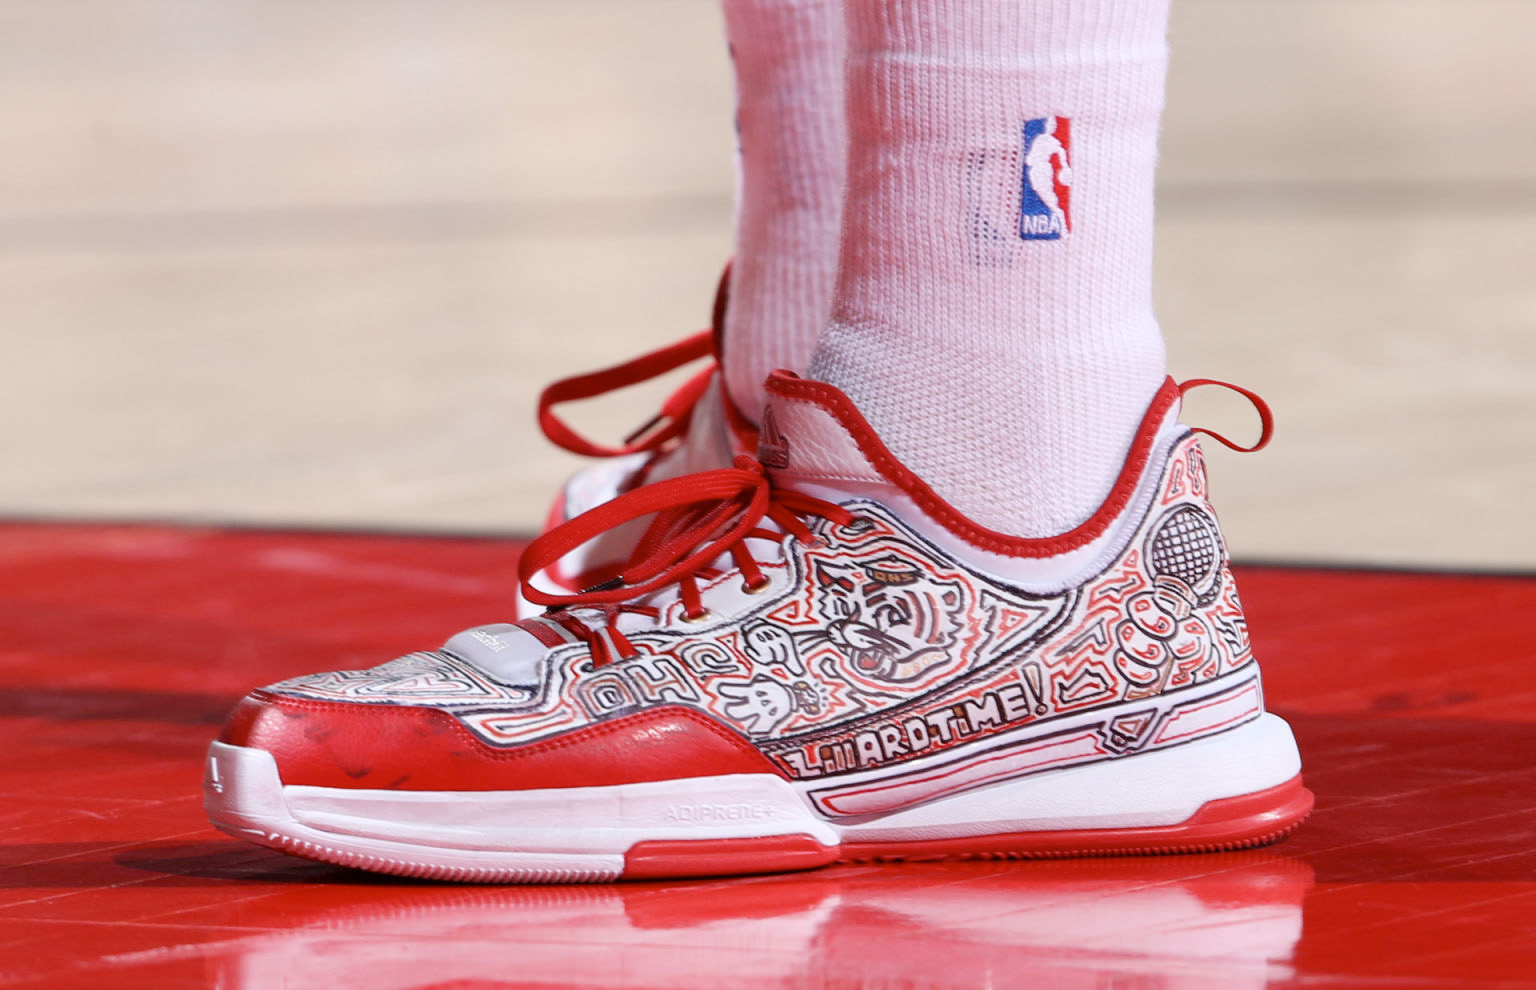 onderpand intelligentie Assimileren The Best Sneakers Worn in the 2015 NBA Playoffs | Sole Collector